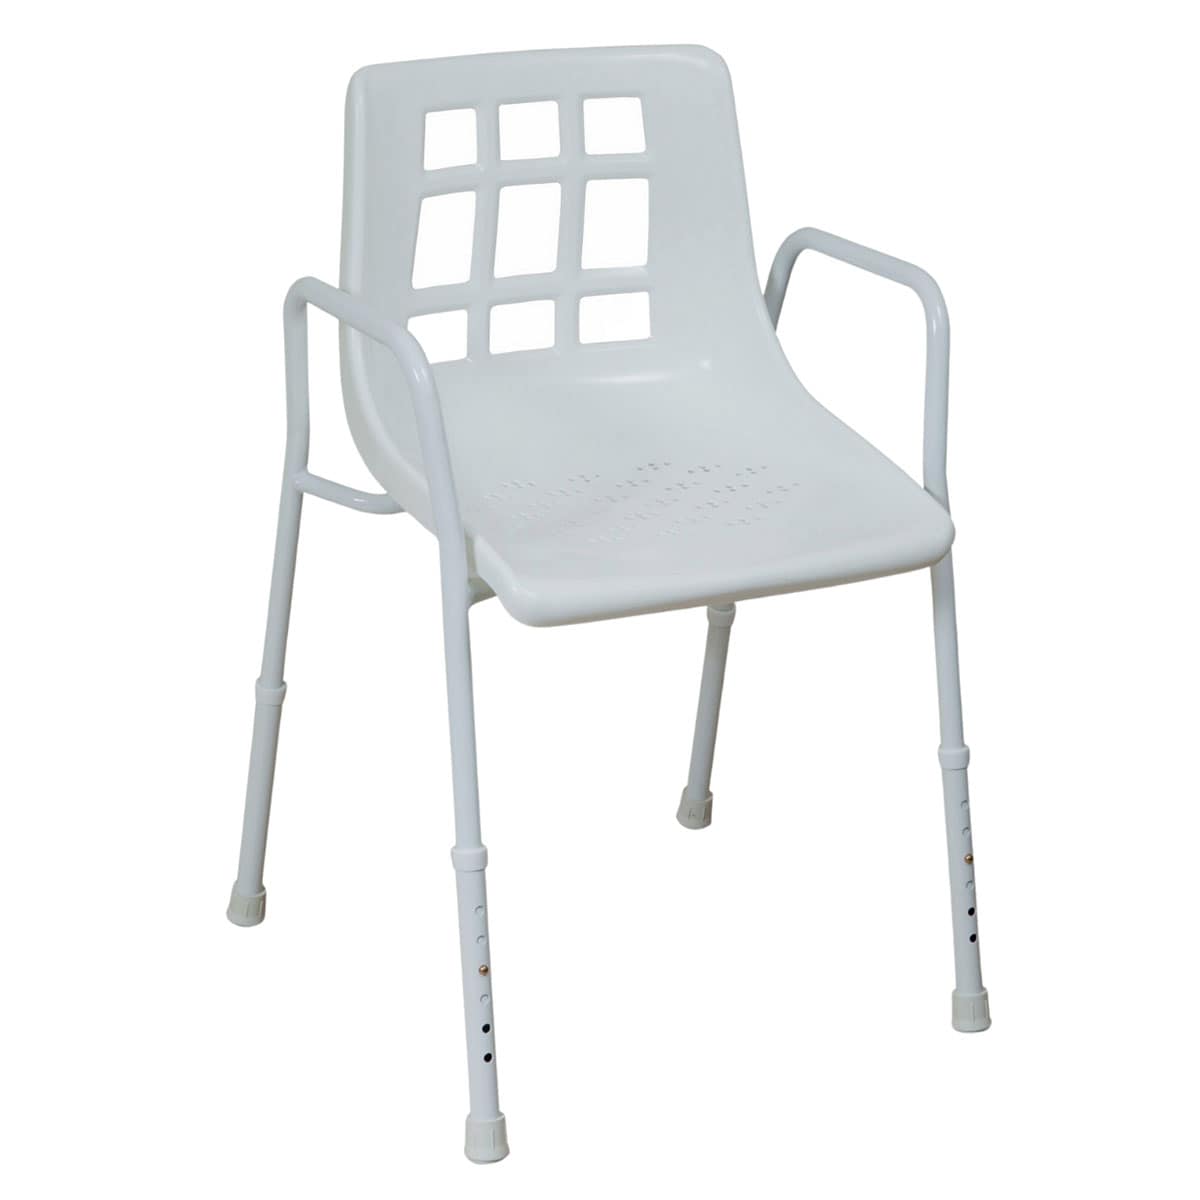 Safety & Mobility Shower Chair